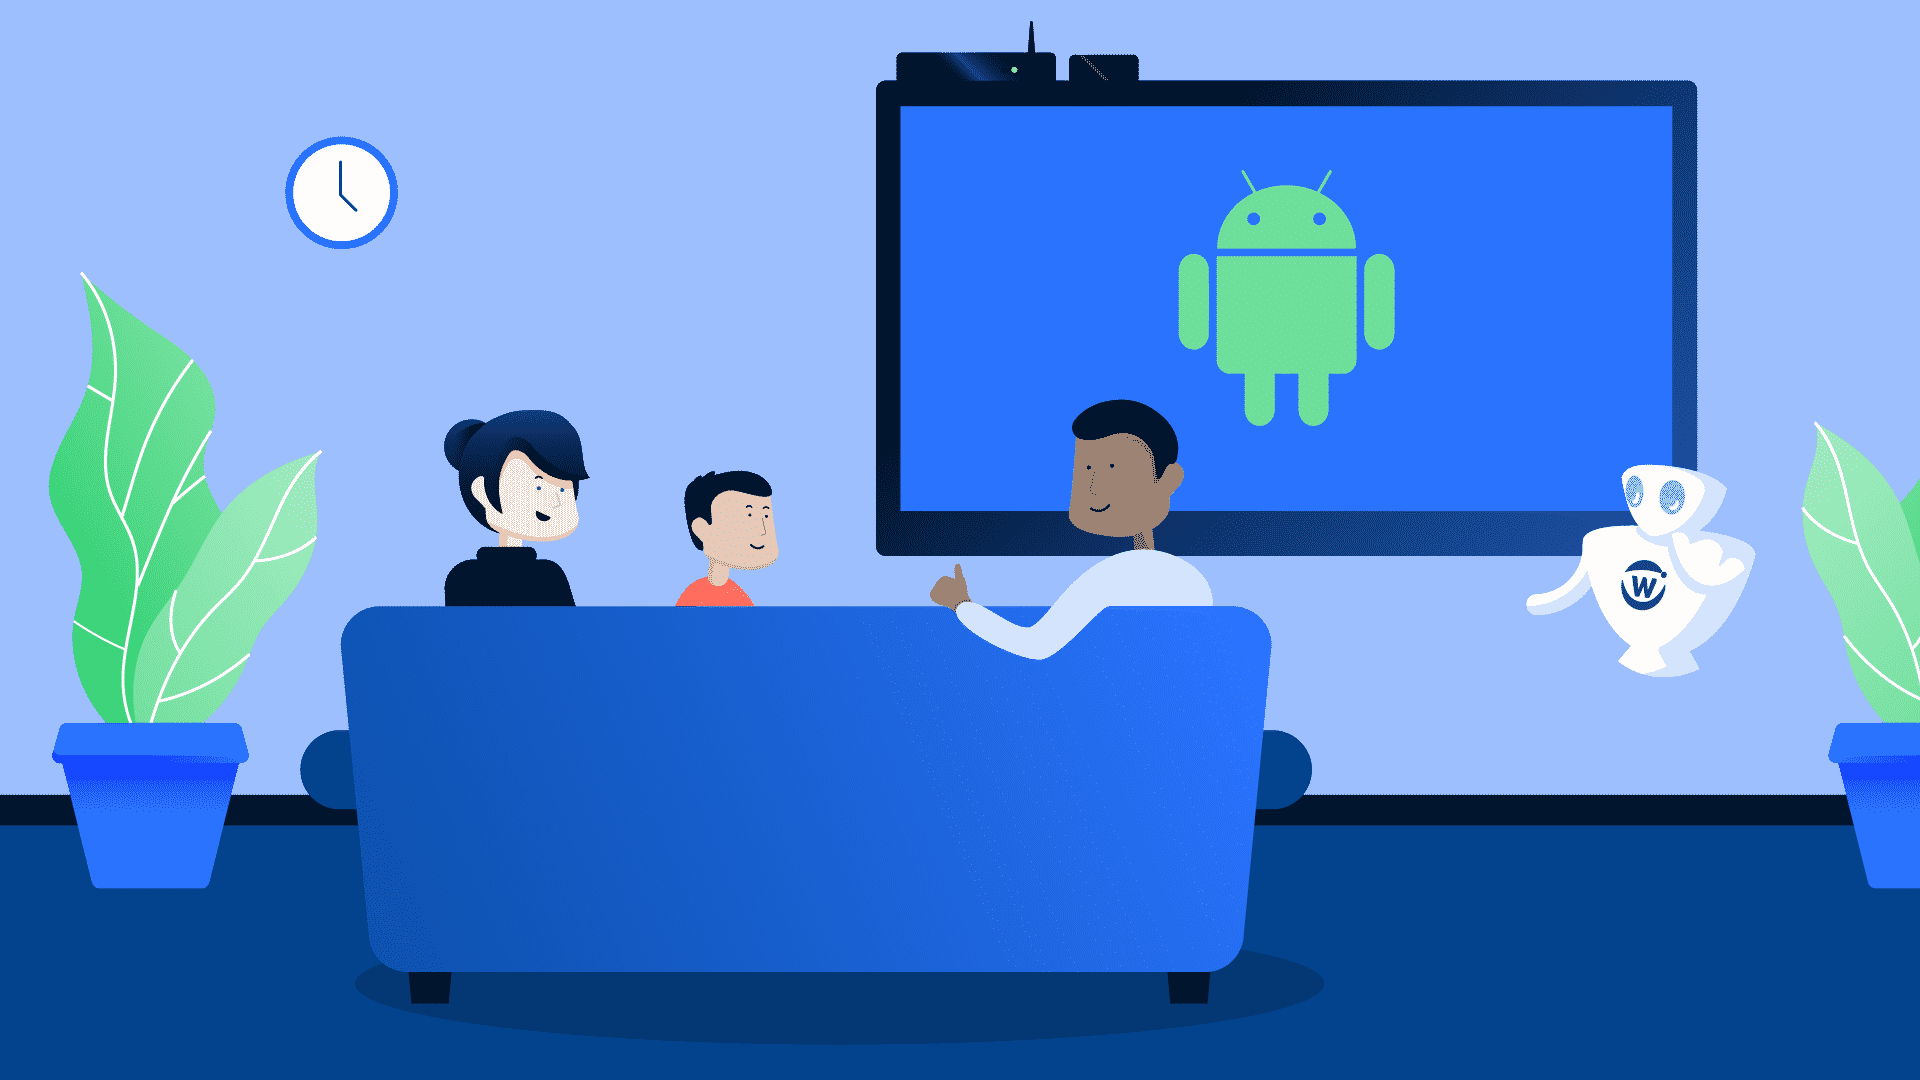 Why is Android TV Test automation so important in 2021?